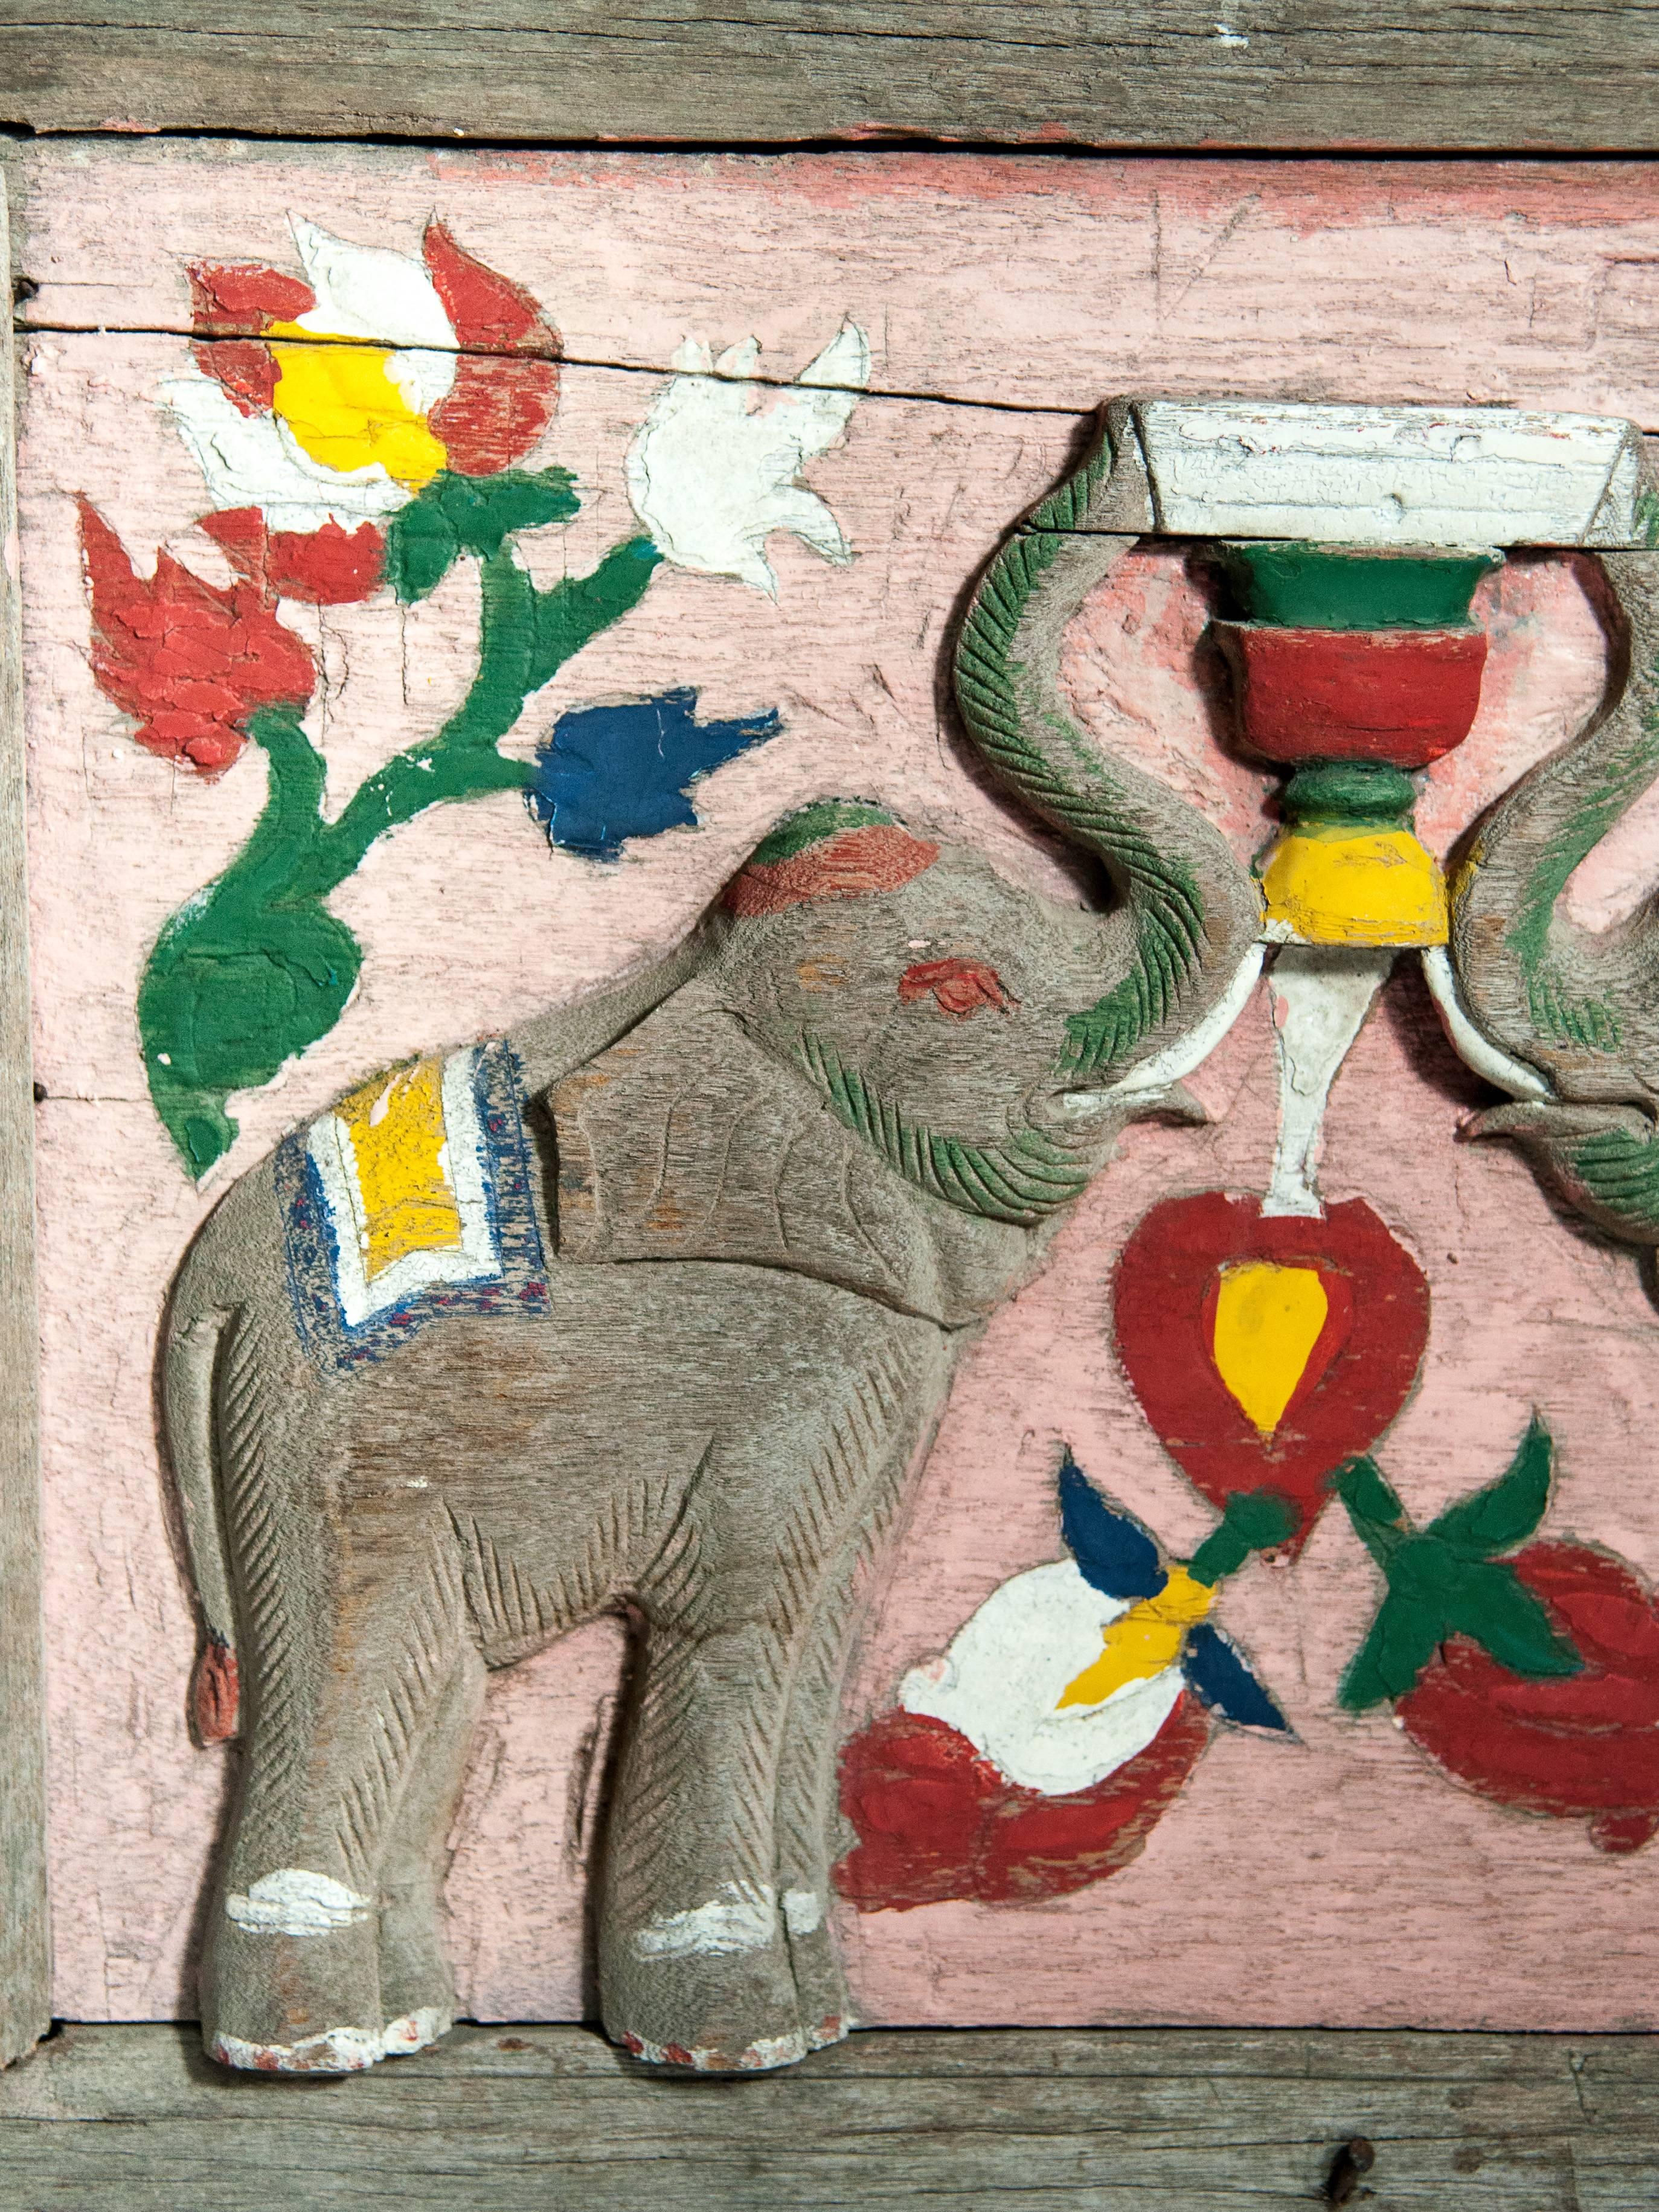 Paint Vintage Hand-Carved Cart Panel, Elephant Motif, Mid-20th Century, North Thailand